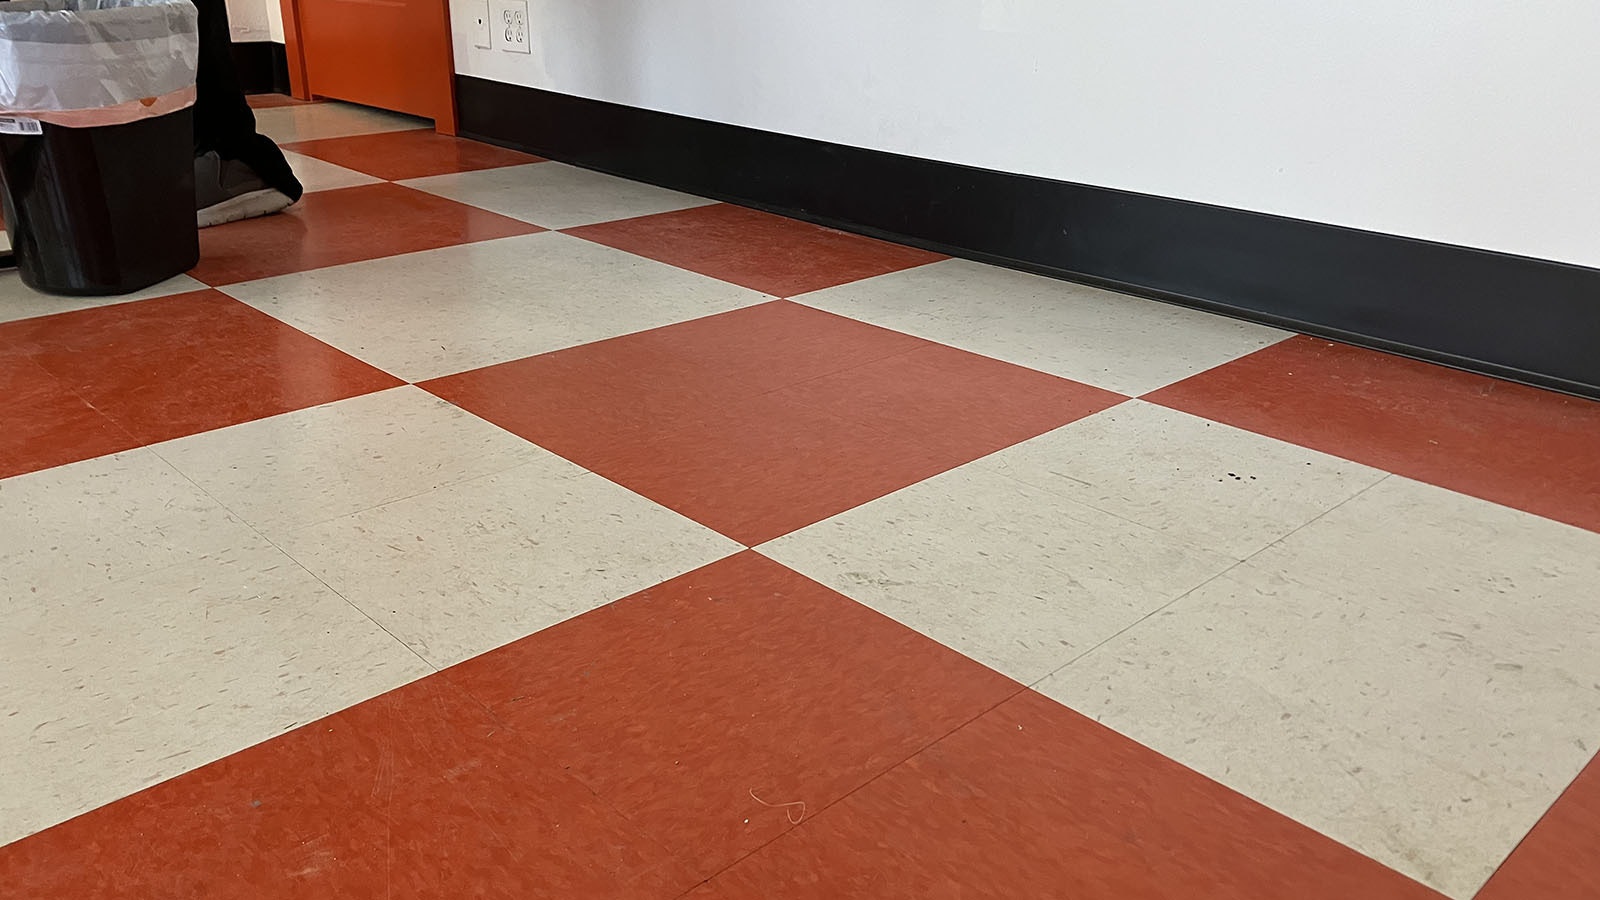 Joseph Parke restored the office area floor of the station with tile that matches the Phillips 66 colors.